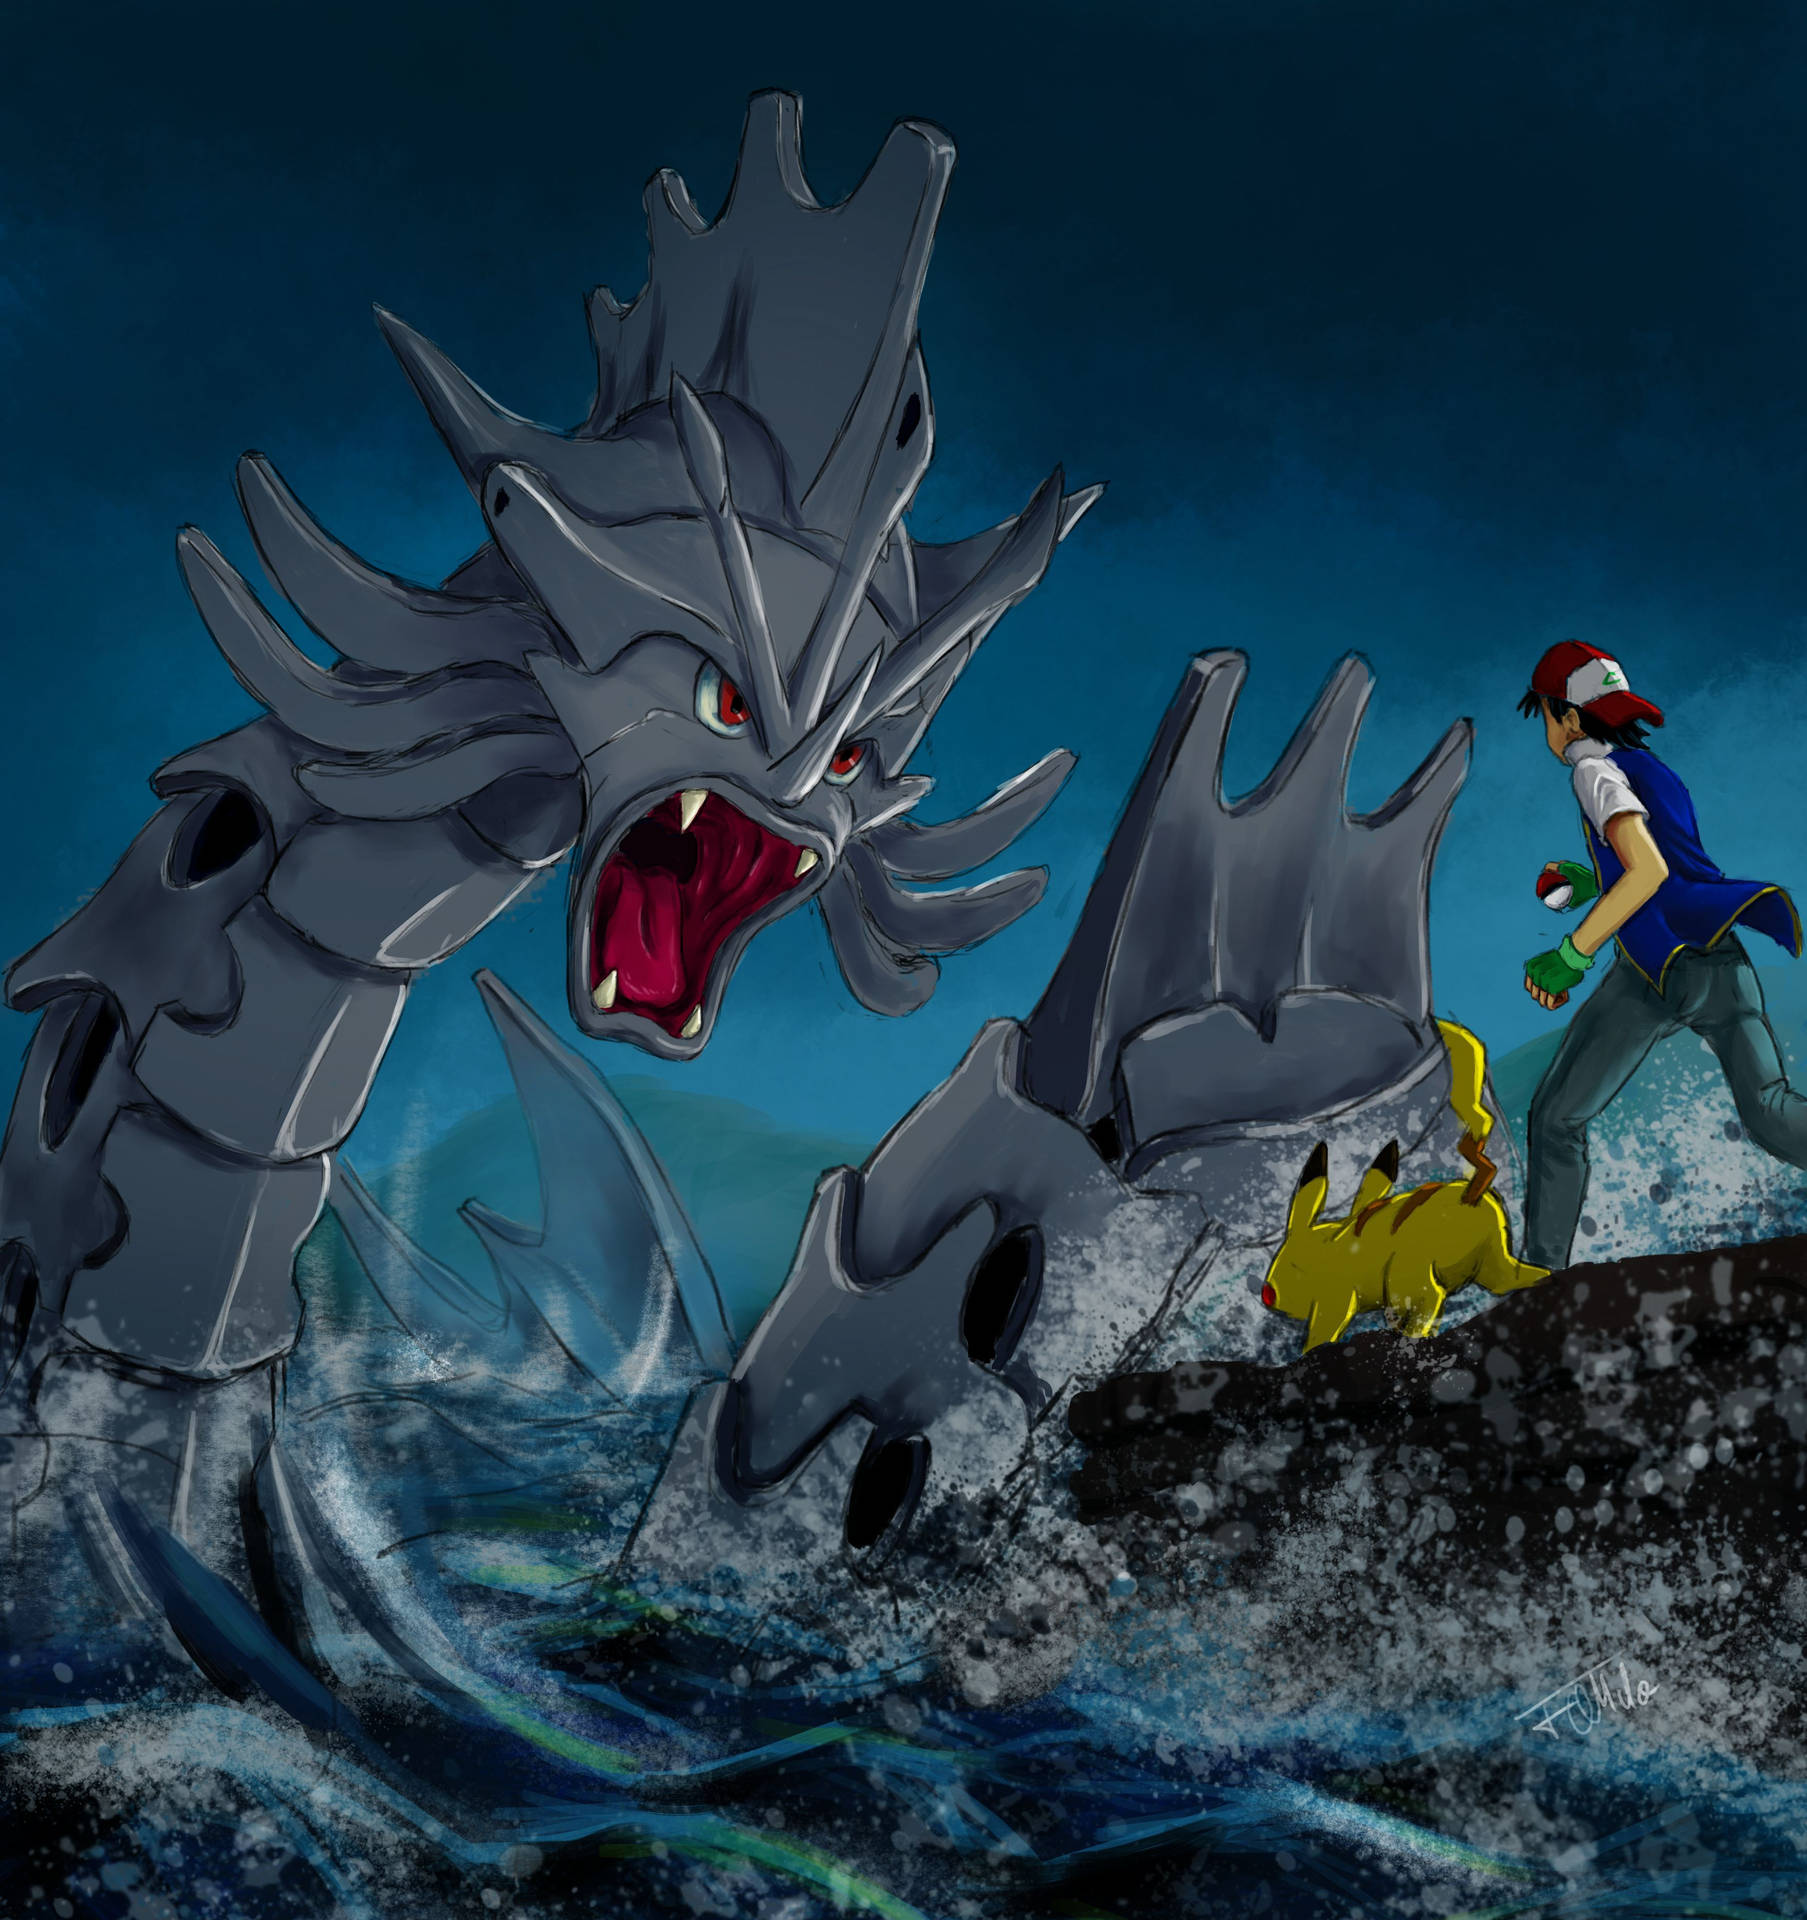 Flying High And Fearless With Gyarados